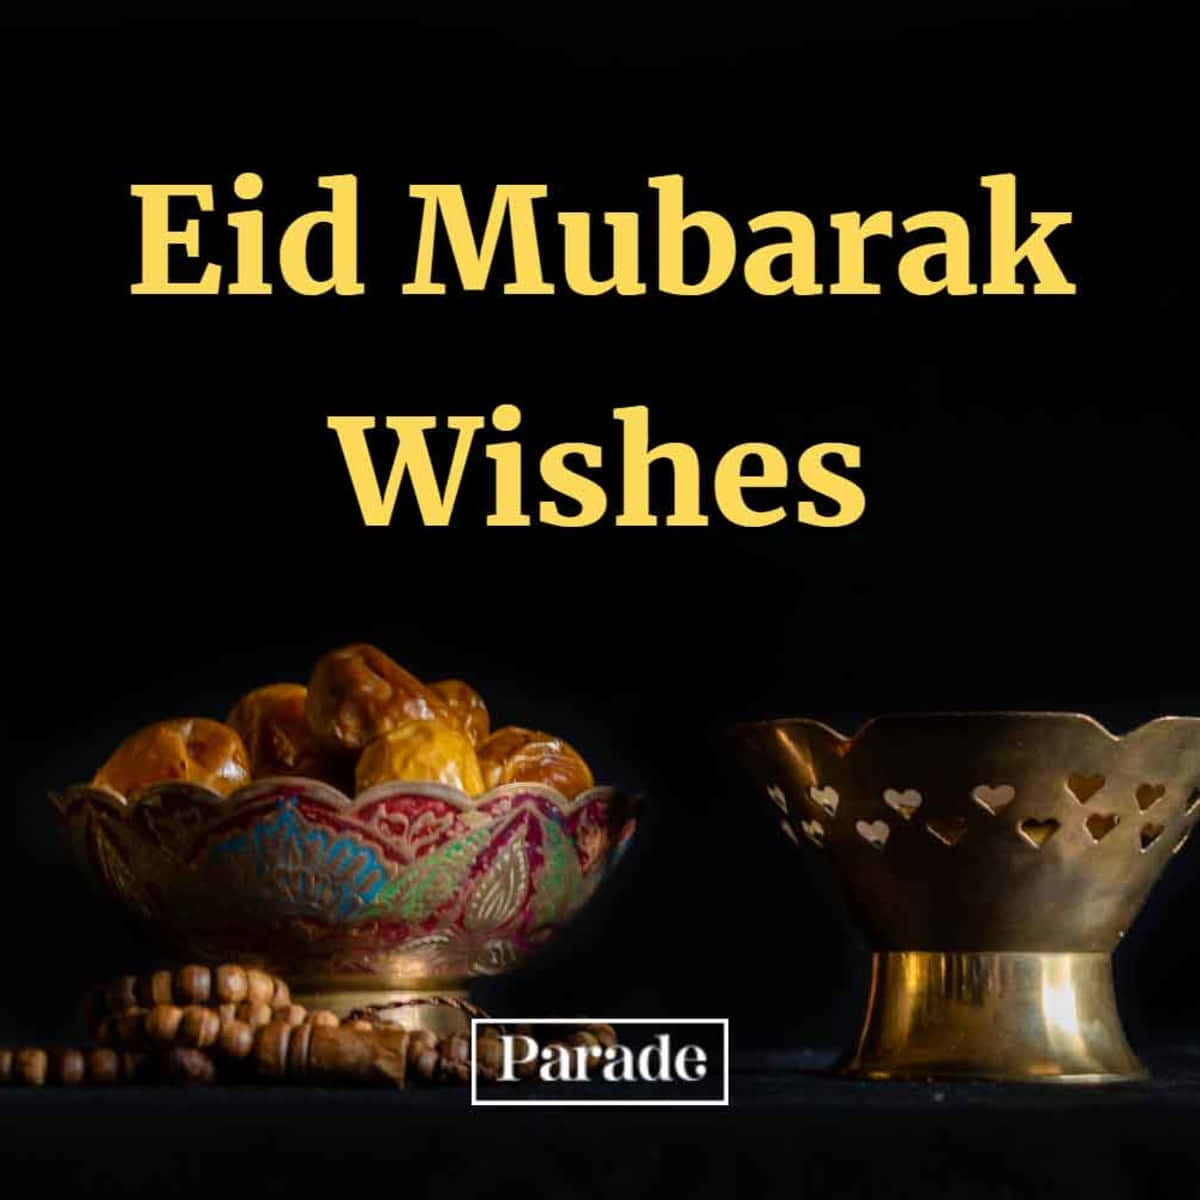 Eid Mubarak Wishes With Bowls And A Black Background